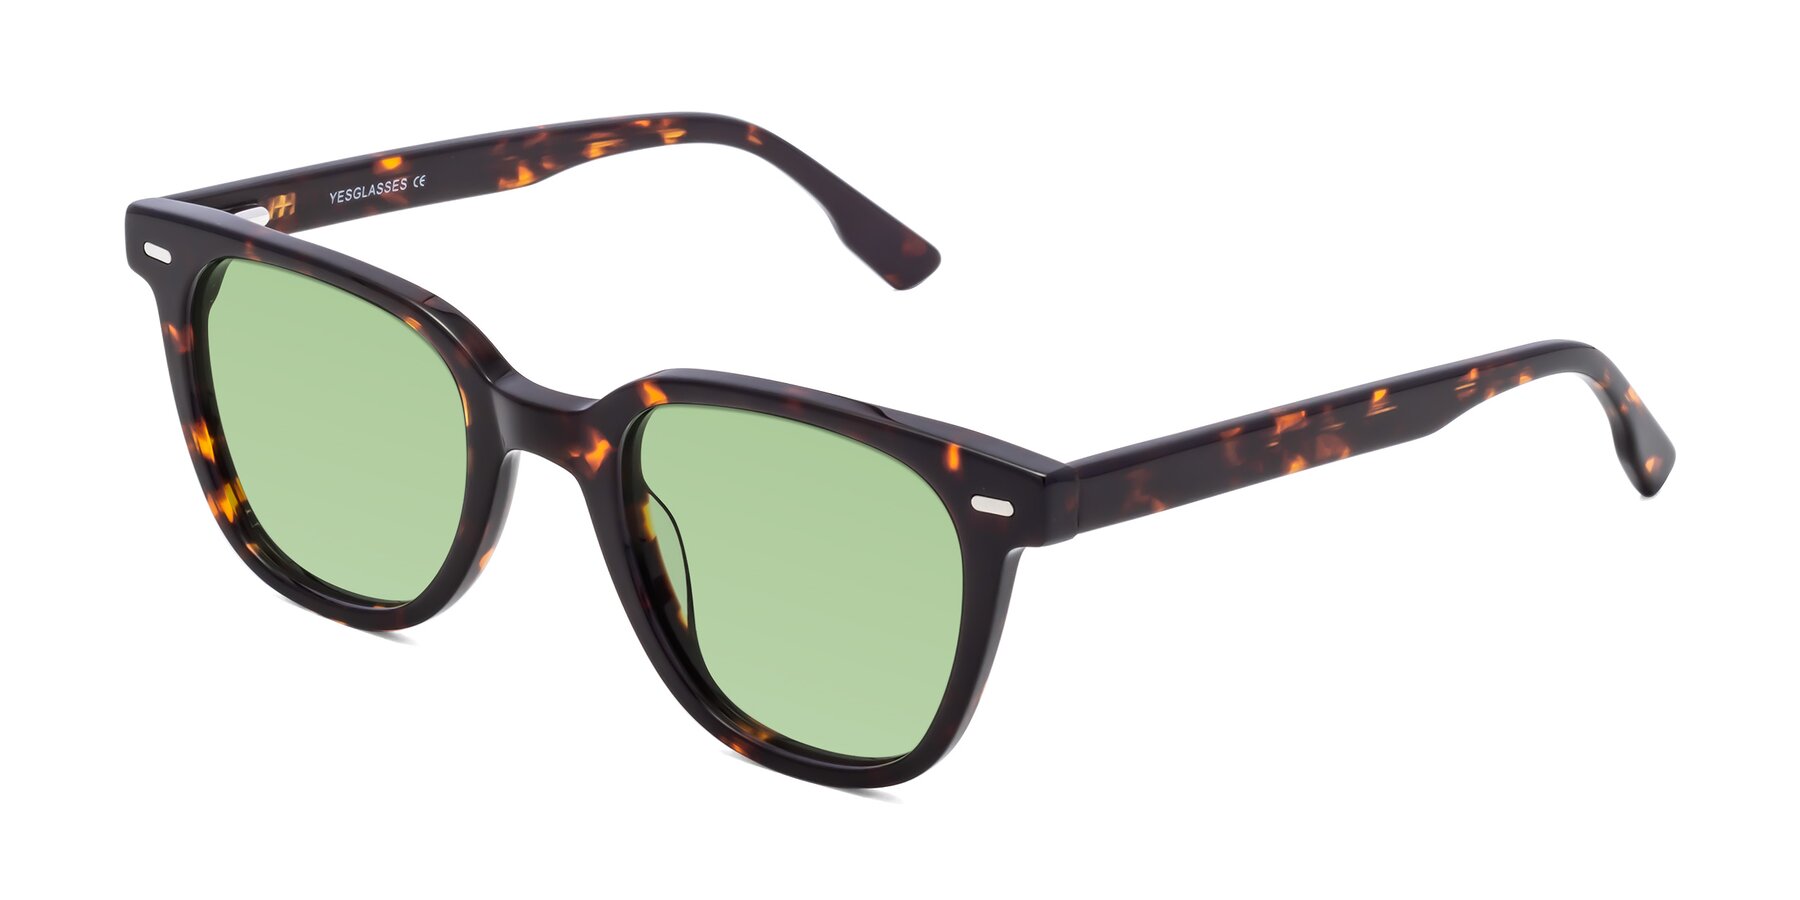 Angle of Beacon in Tortoise with Medium Green Tinted Lenses